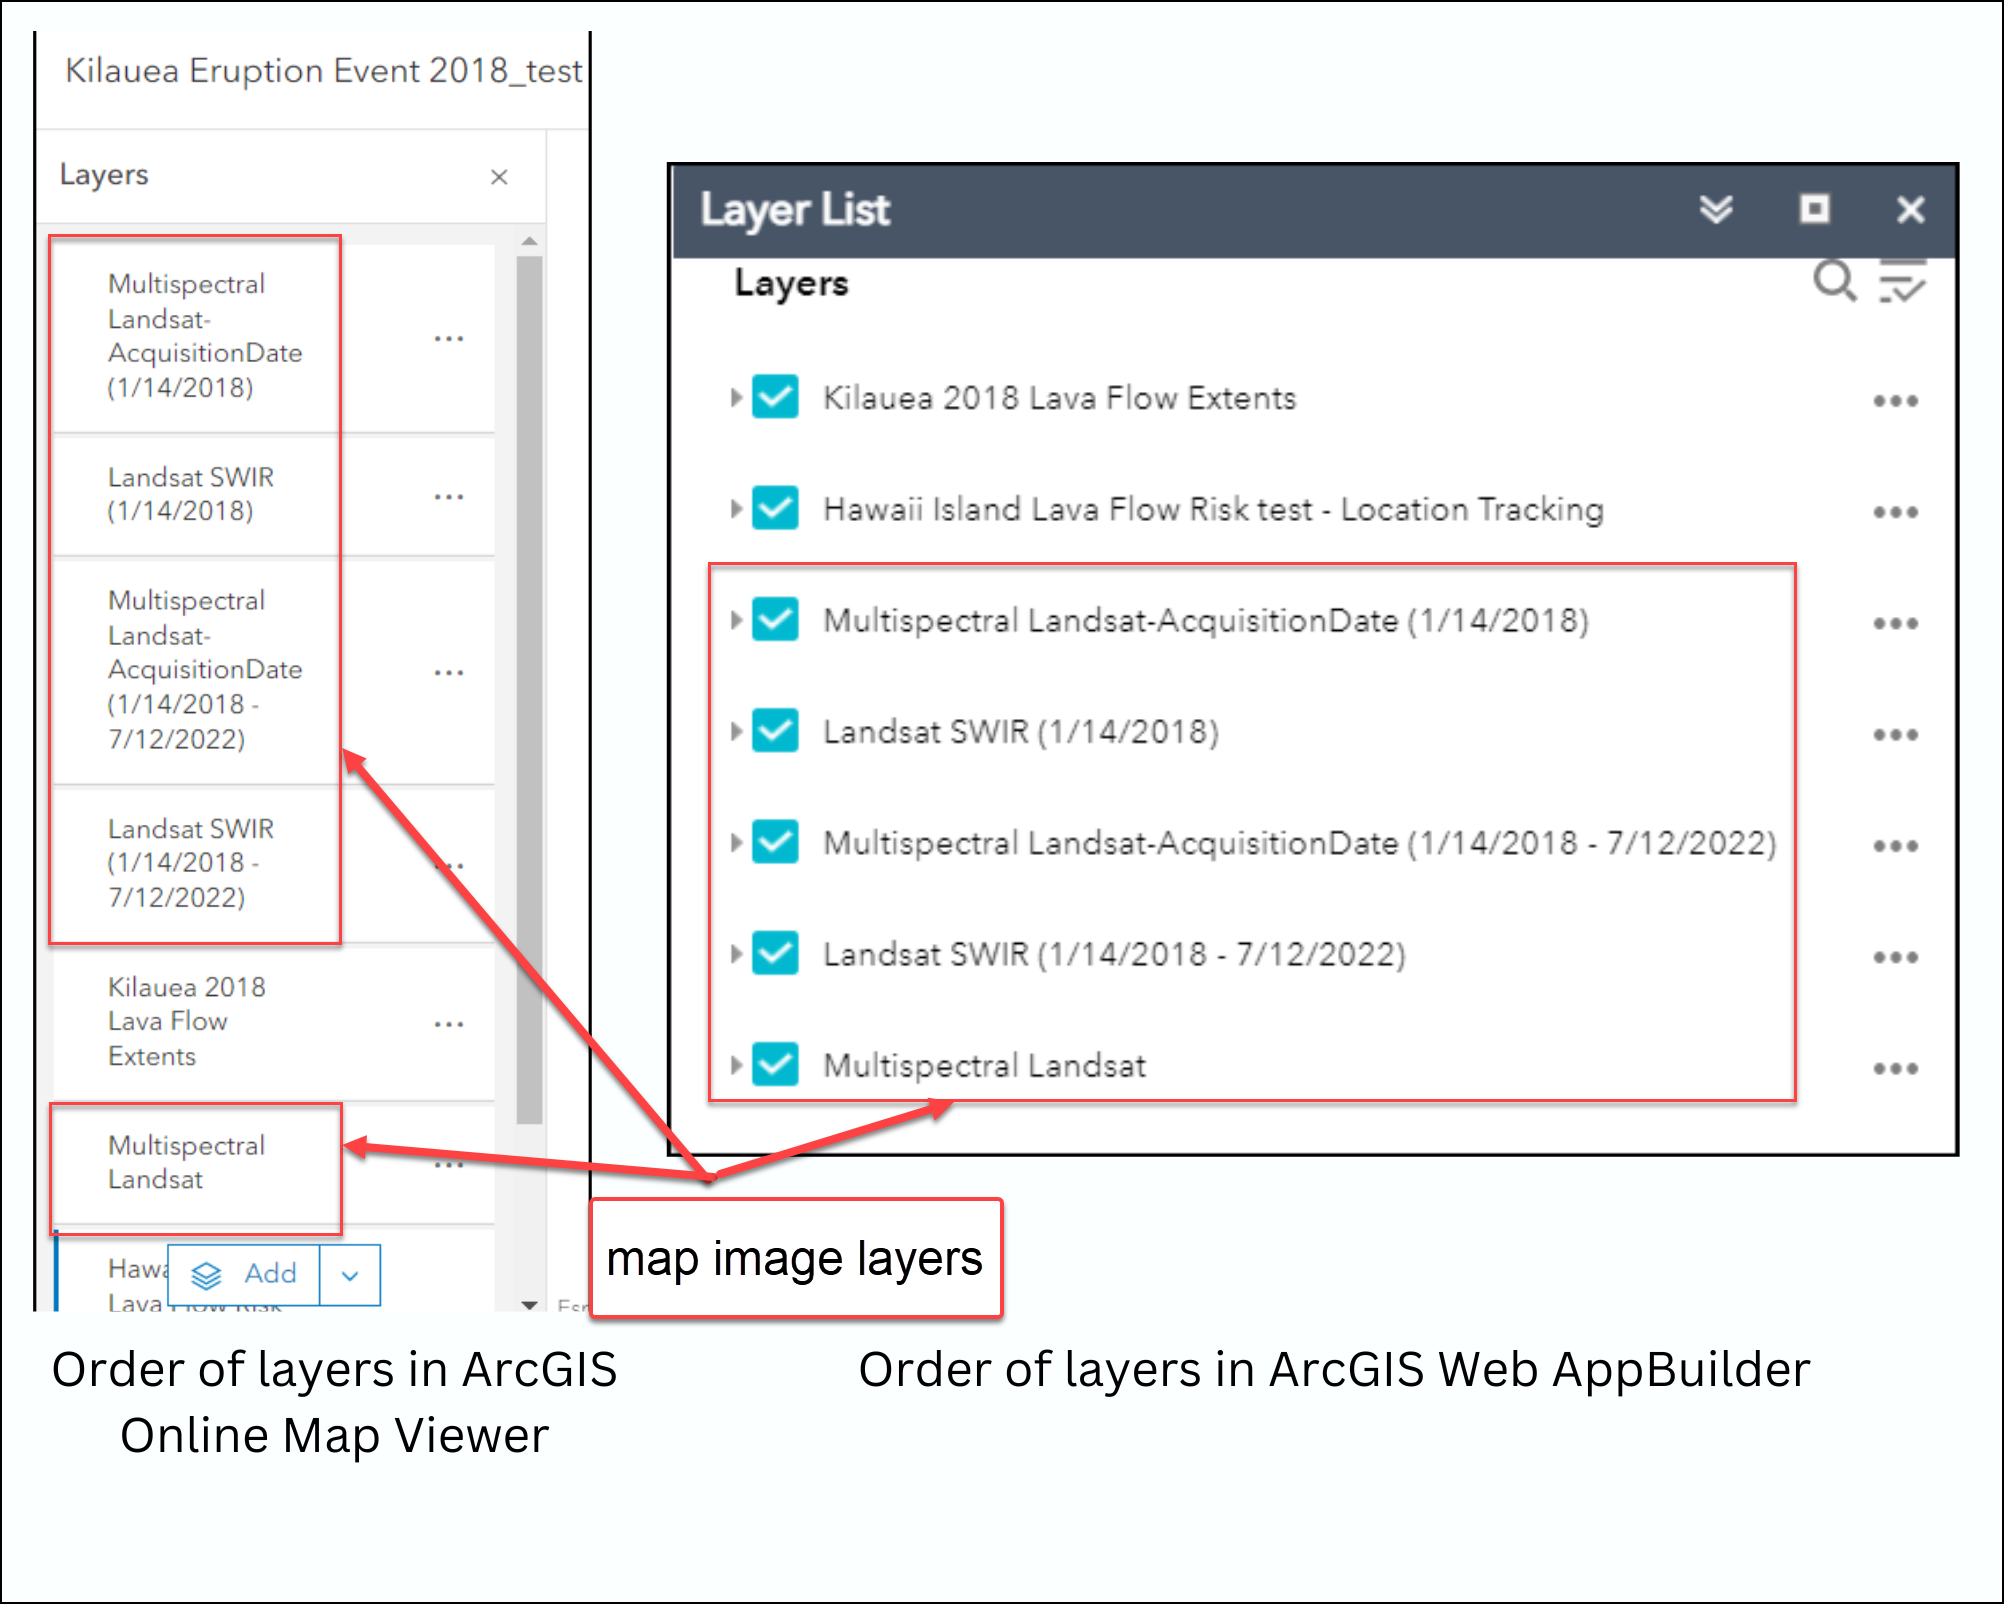 The image of the comparison of the layer's order between ArcGIS Online Map Viewer and ArcGIS Web AppBuilder.